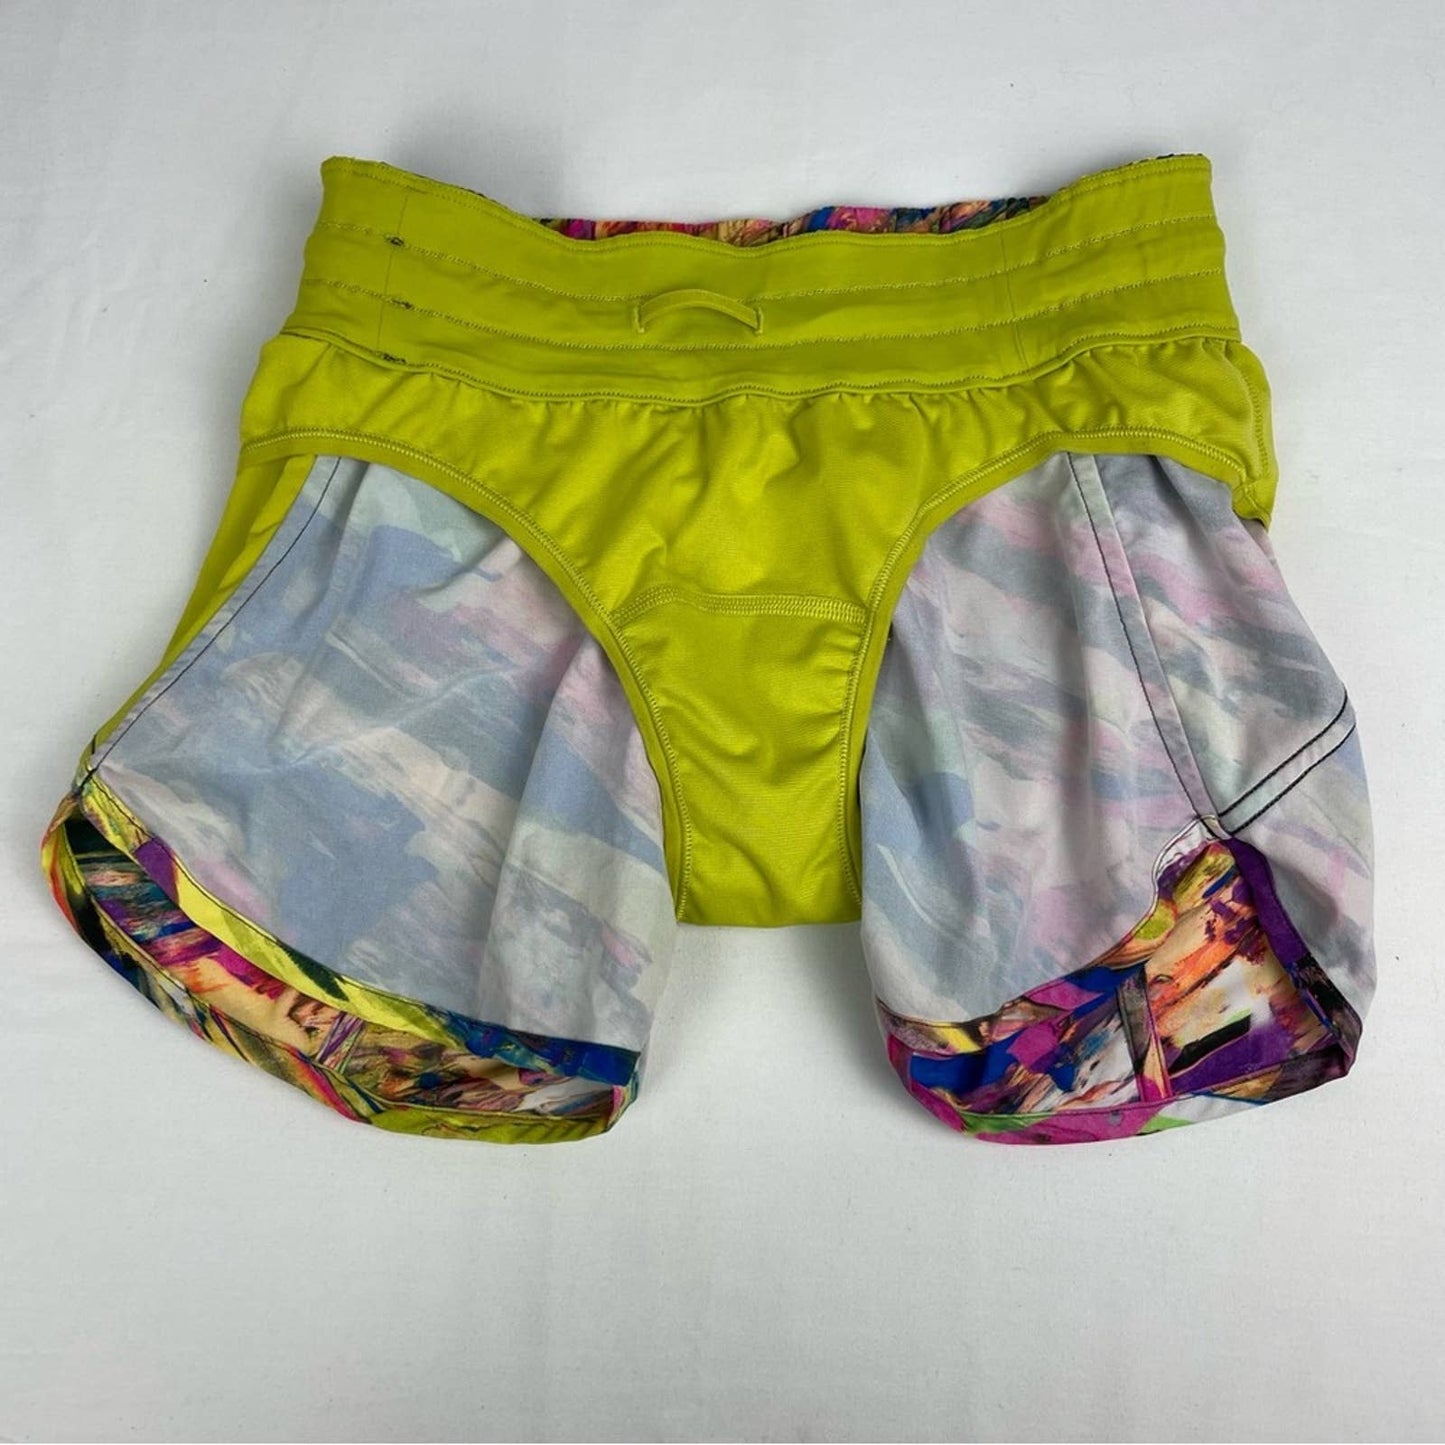 Lululemon Tracker Shorts V 4" Catalyst Multi Electric Abstract 90s Y2K Style Size 6